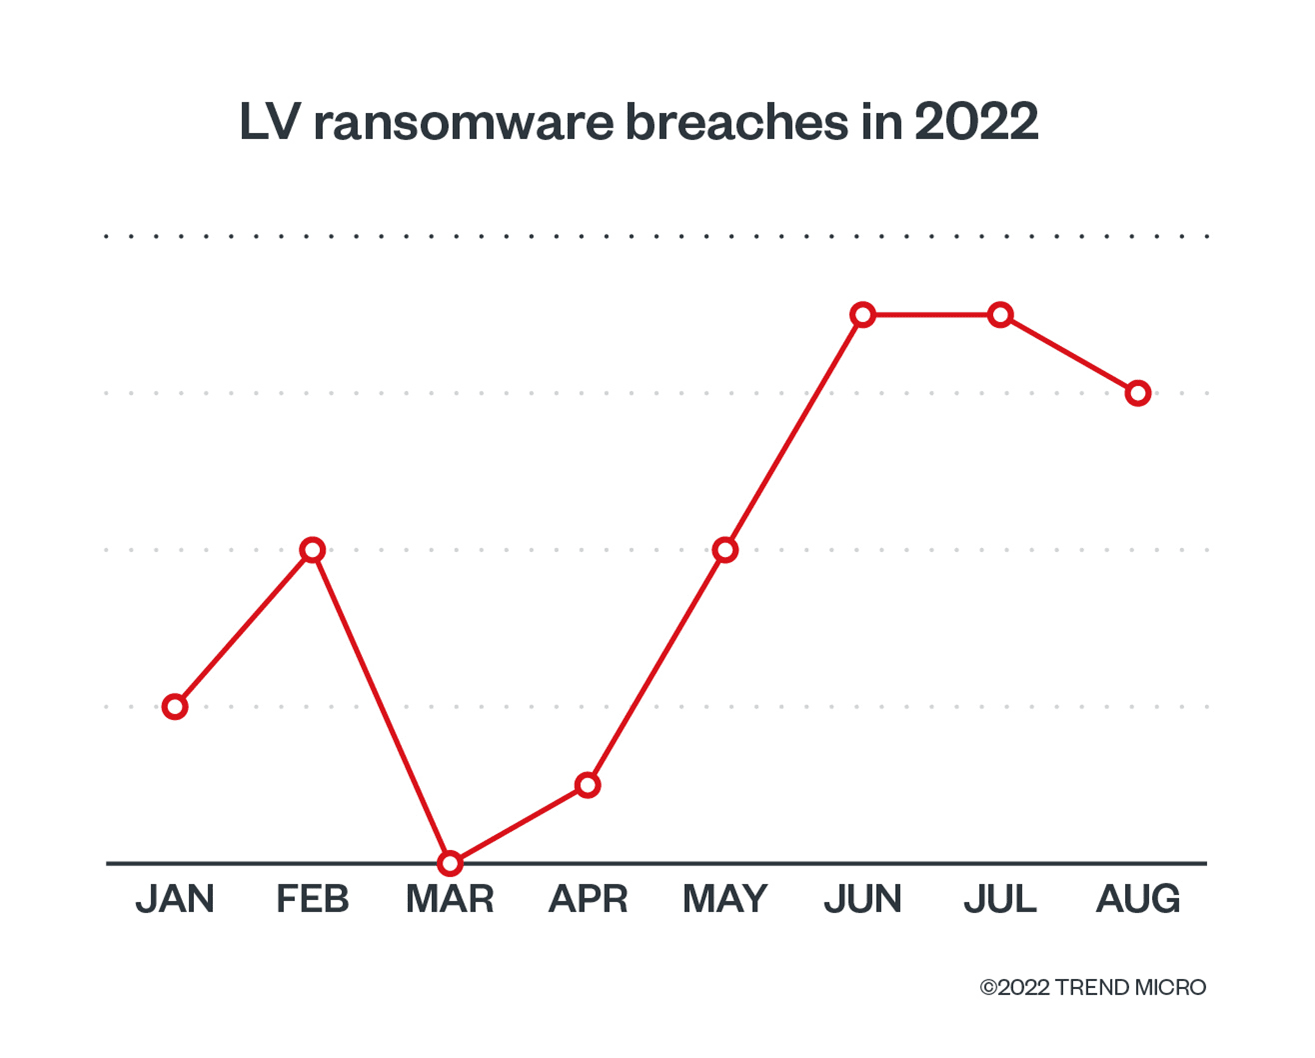 Figure 3. The number of incidents that are reportedly related to LV ransomware have been on the rise